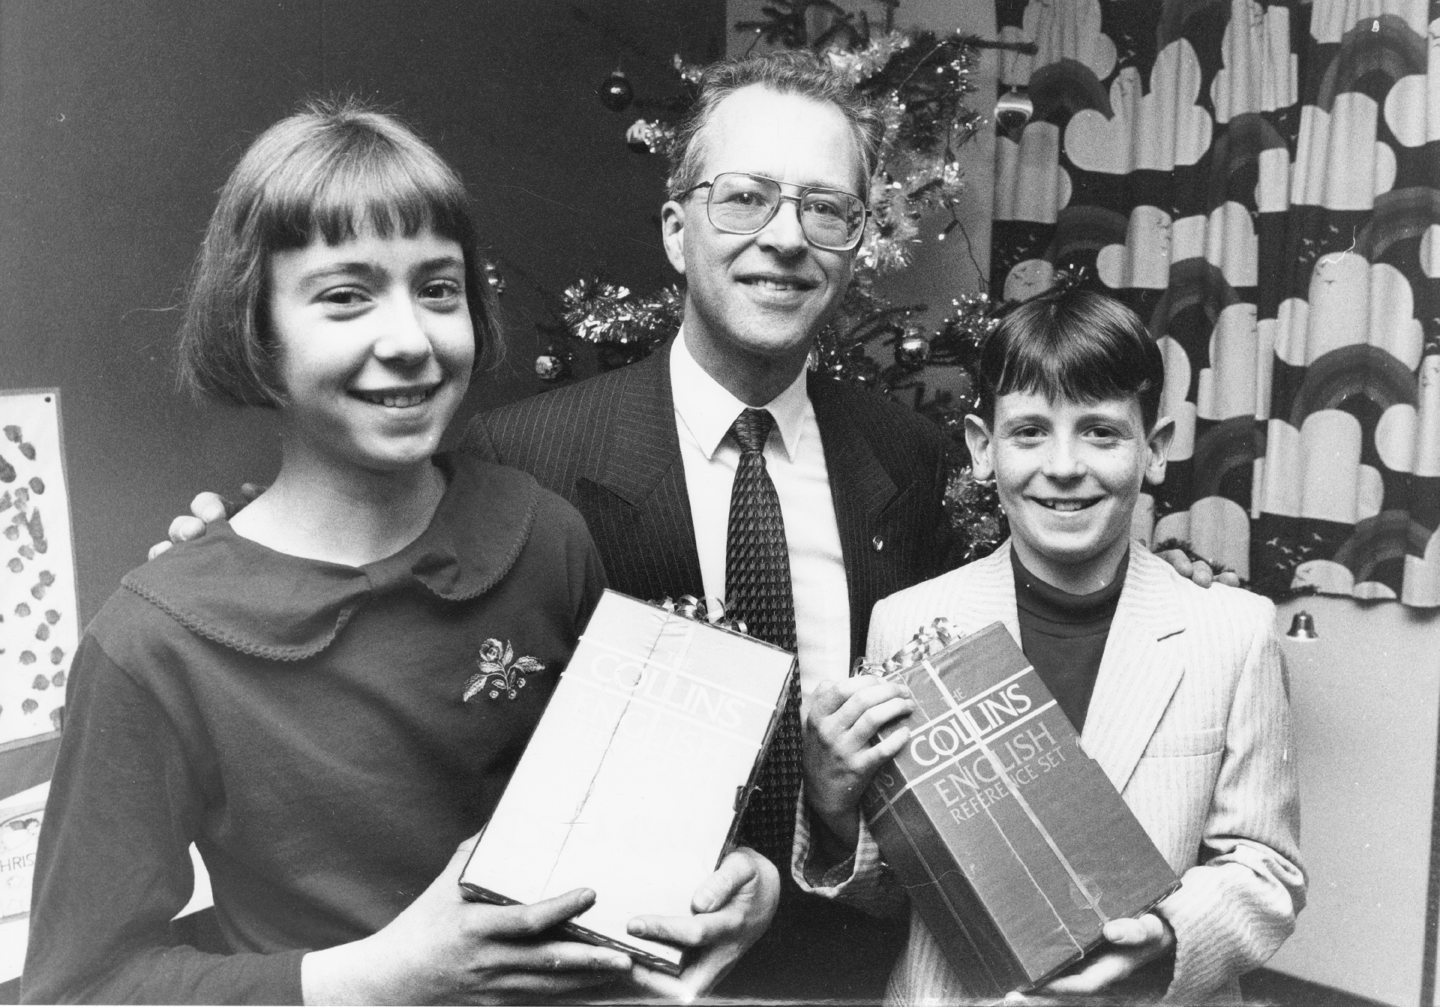 Graeme Munro, a member of the Friends of Danestone Primary School Award Trust, presents Emily Hesp and Andrew Pearson with awards for being the pupils who worked hardest in primary school work for the year 1989-90.